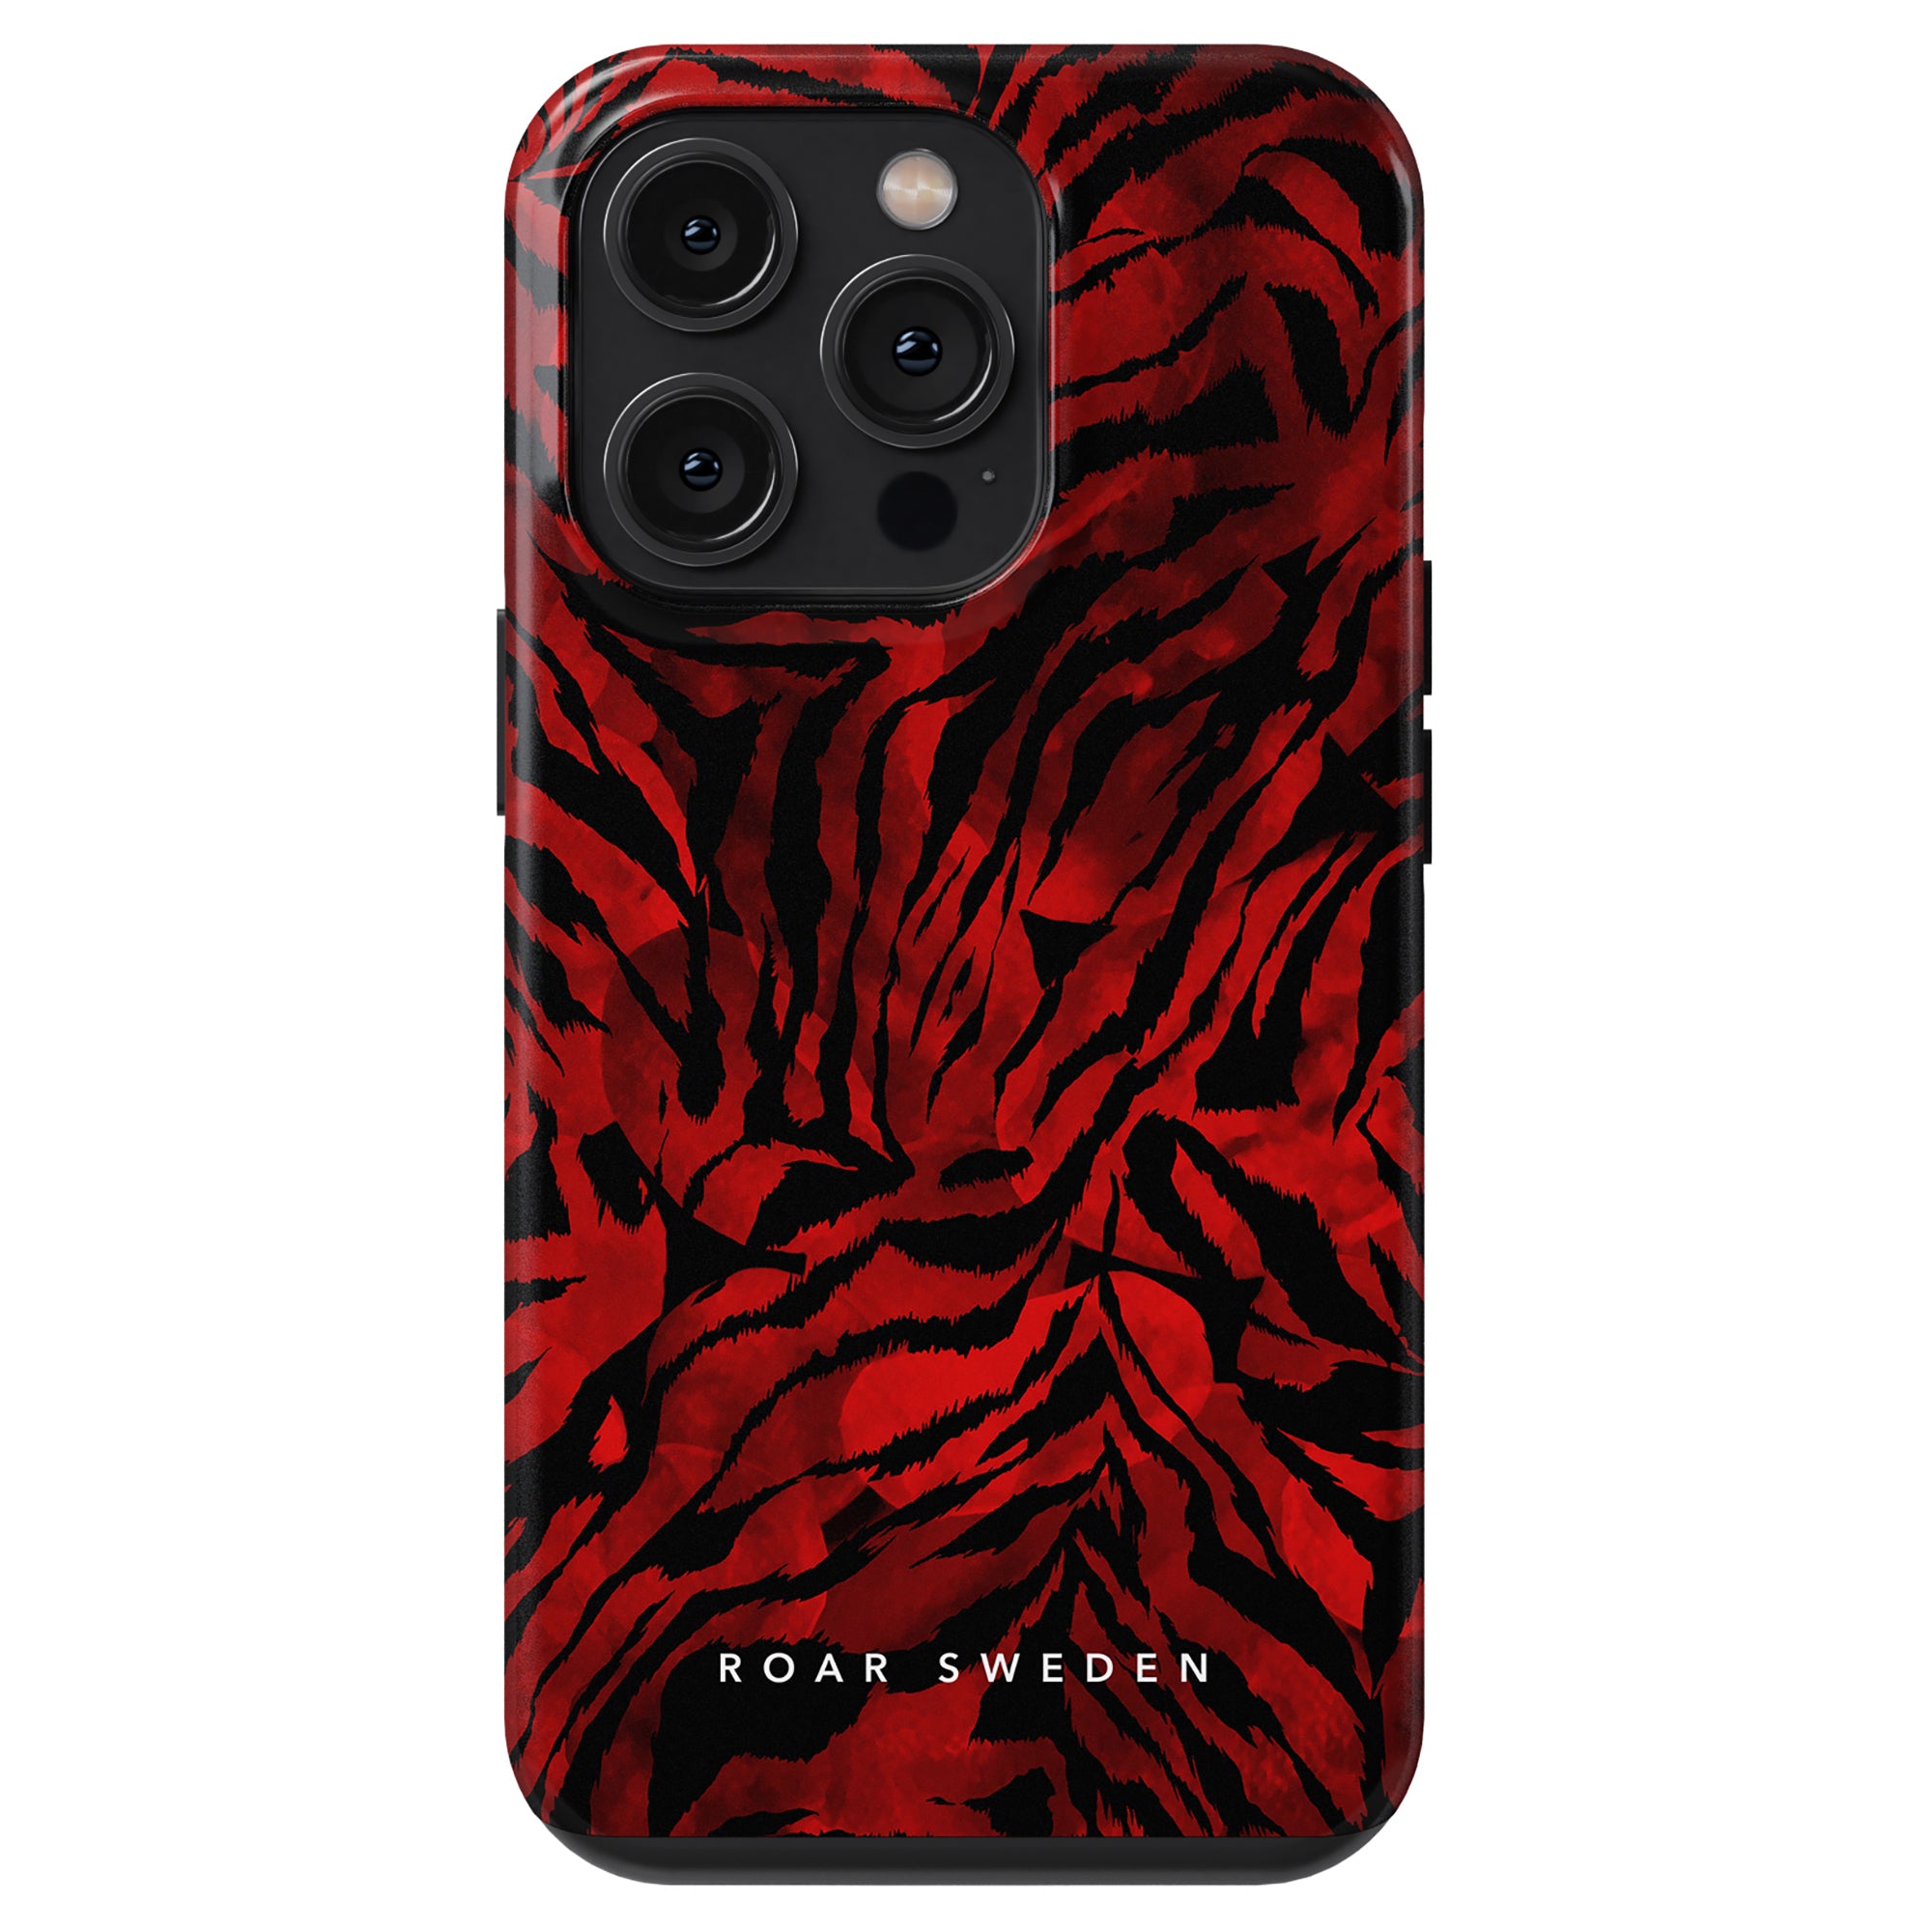 A stylish Blood Tiger - Tough Case for the iPhone 11, featuring a vibrant combination of red and black.